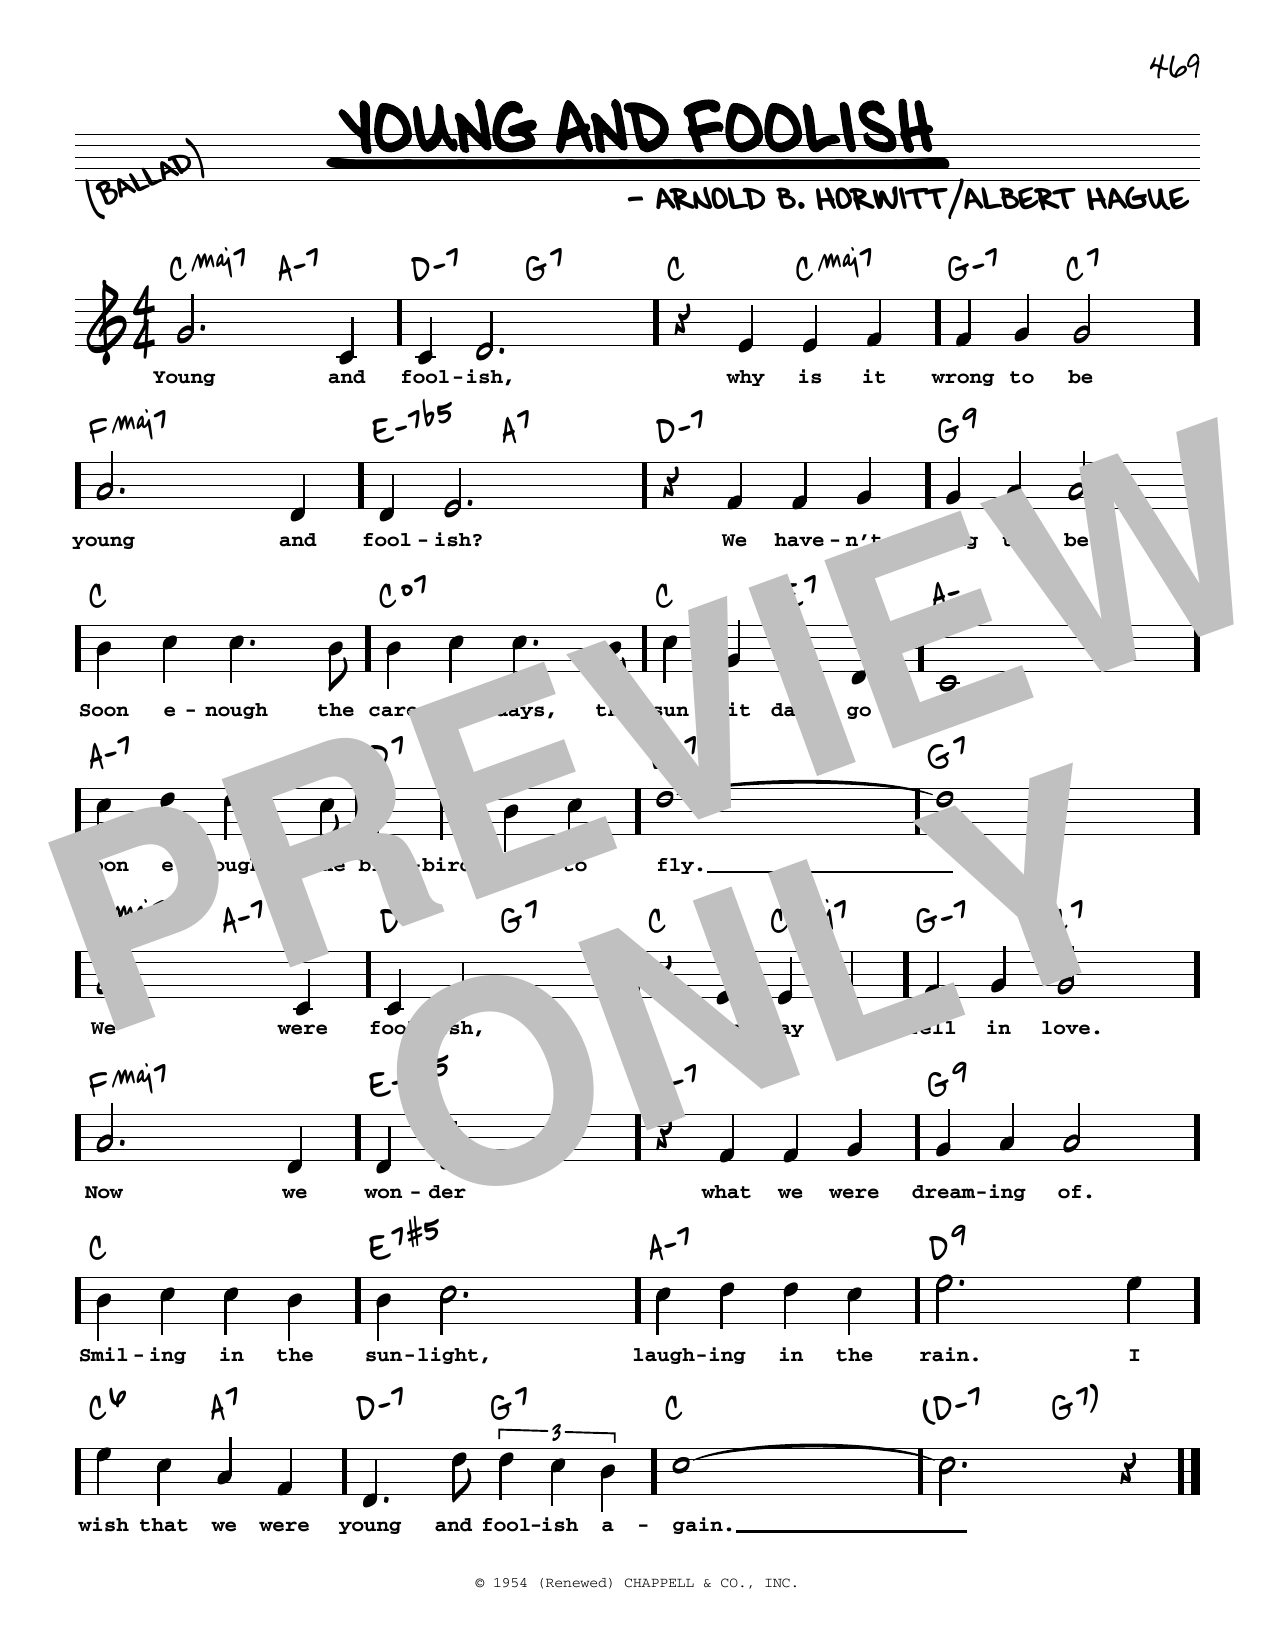 Download Arnold Horwitt and Albert Hague Young And Foolish (High Voice) (from Pl Sheet Music